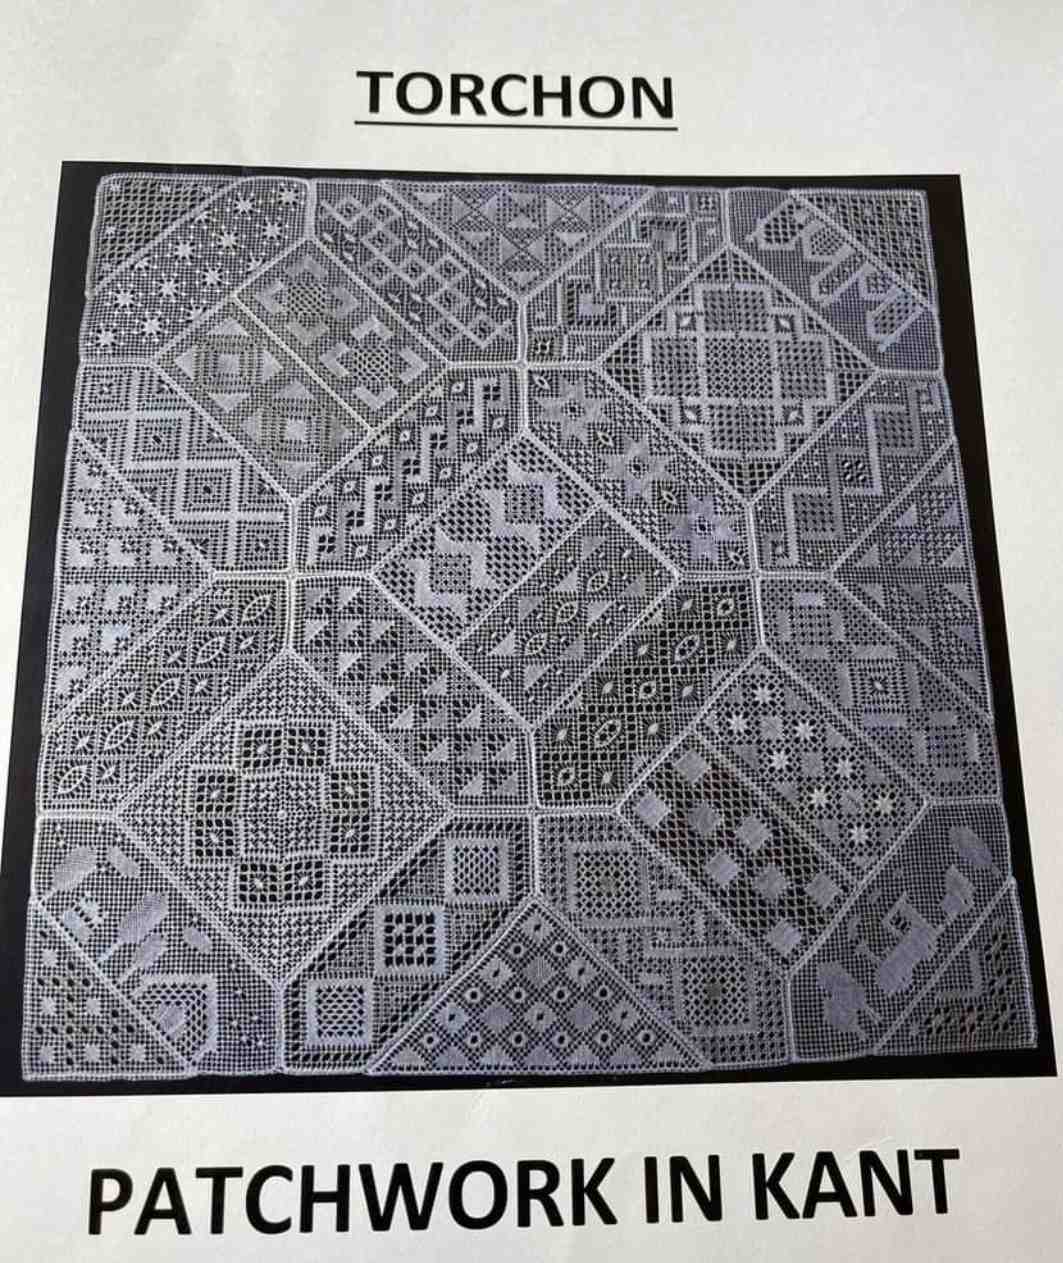 looking for: Patchwork in Kant